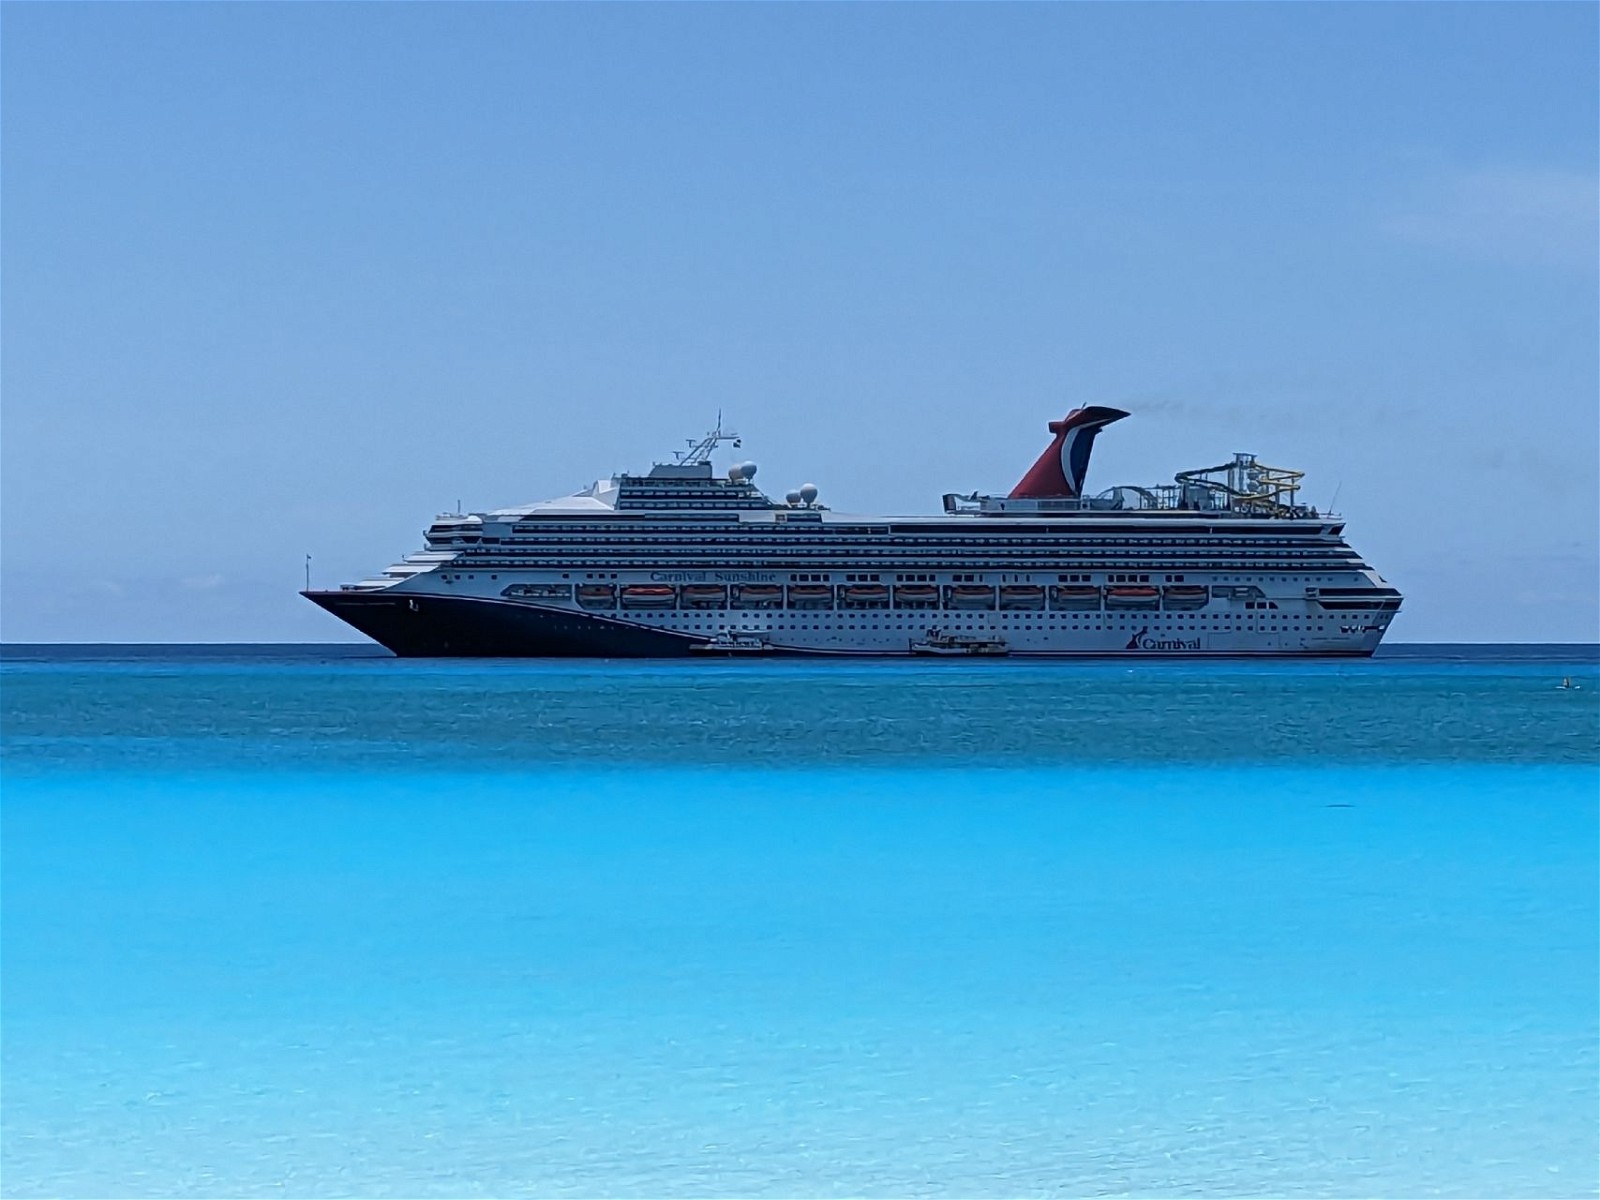 The Carnival Sunshine is renowned for its diverse range of onboard activities and entertainment options